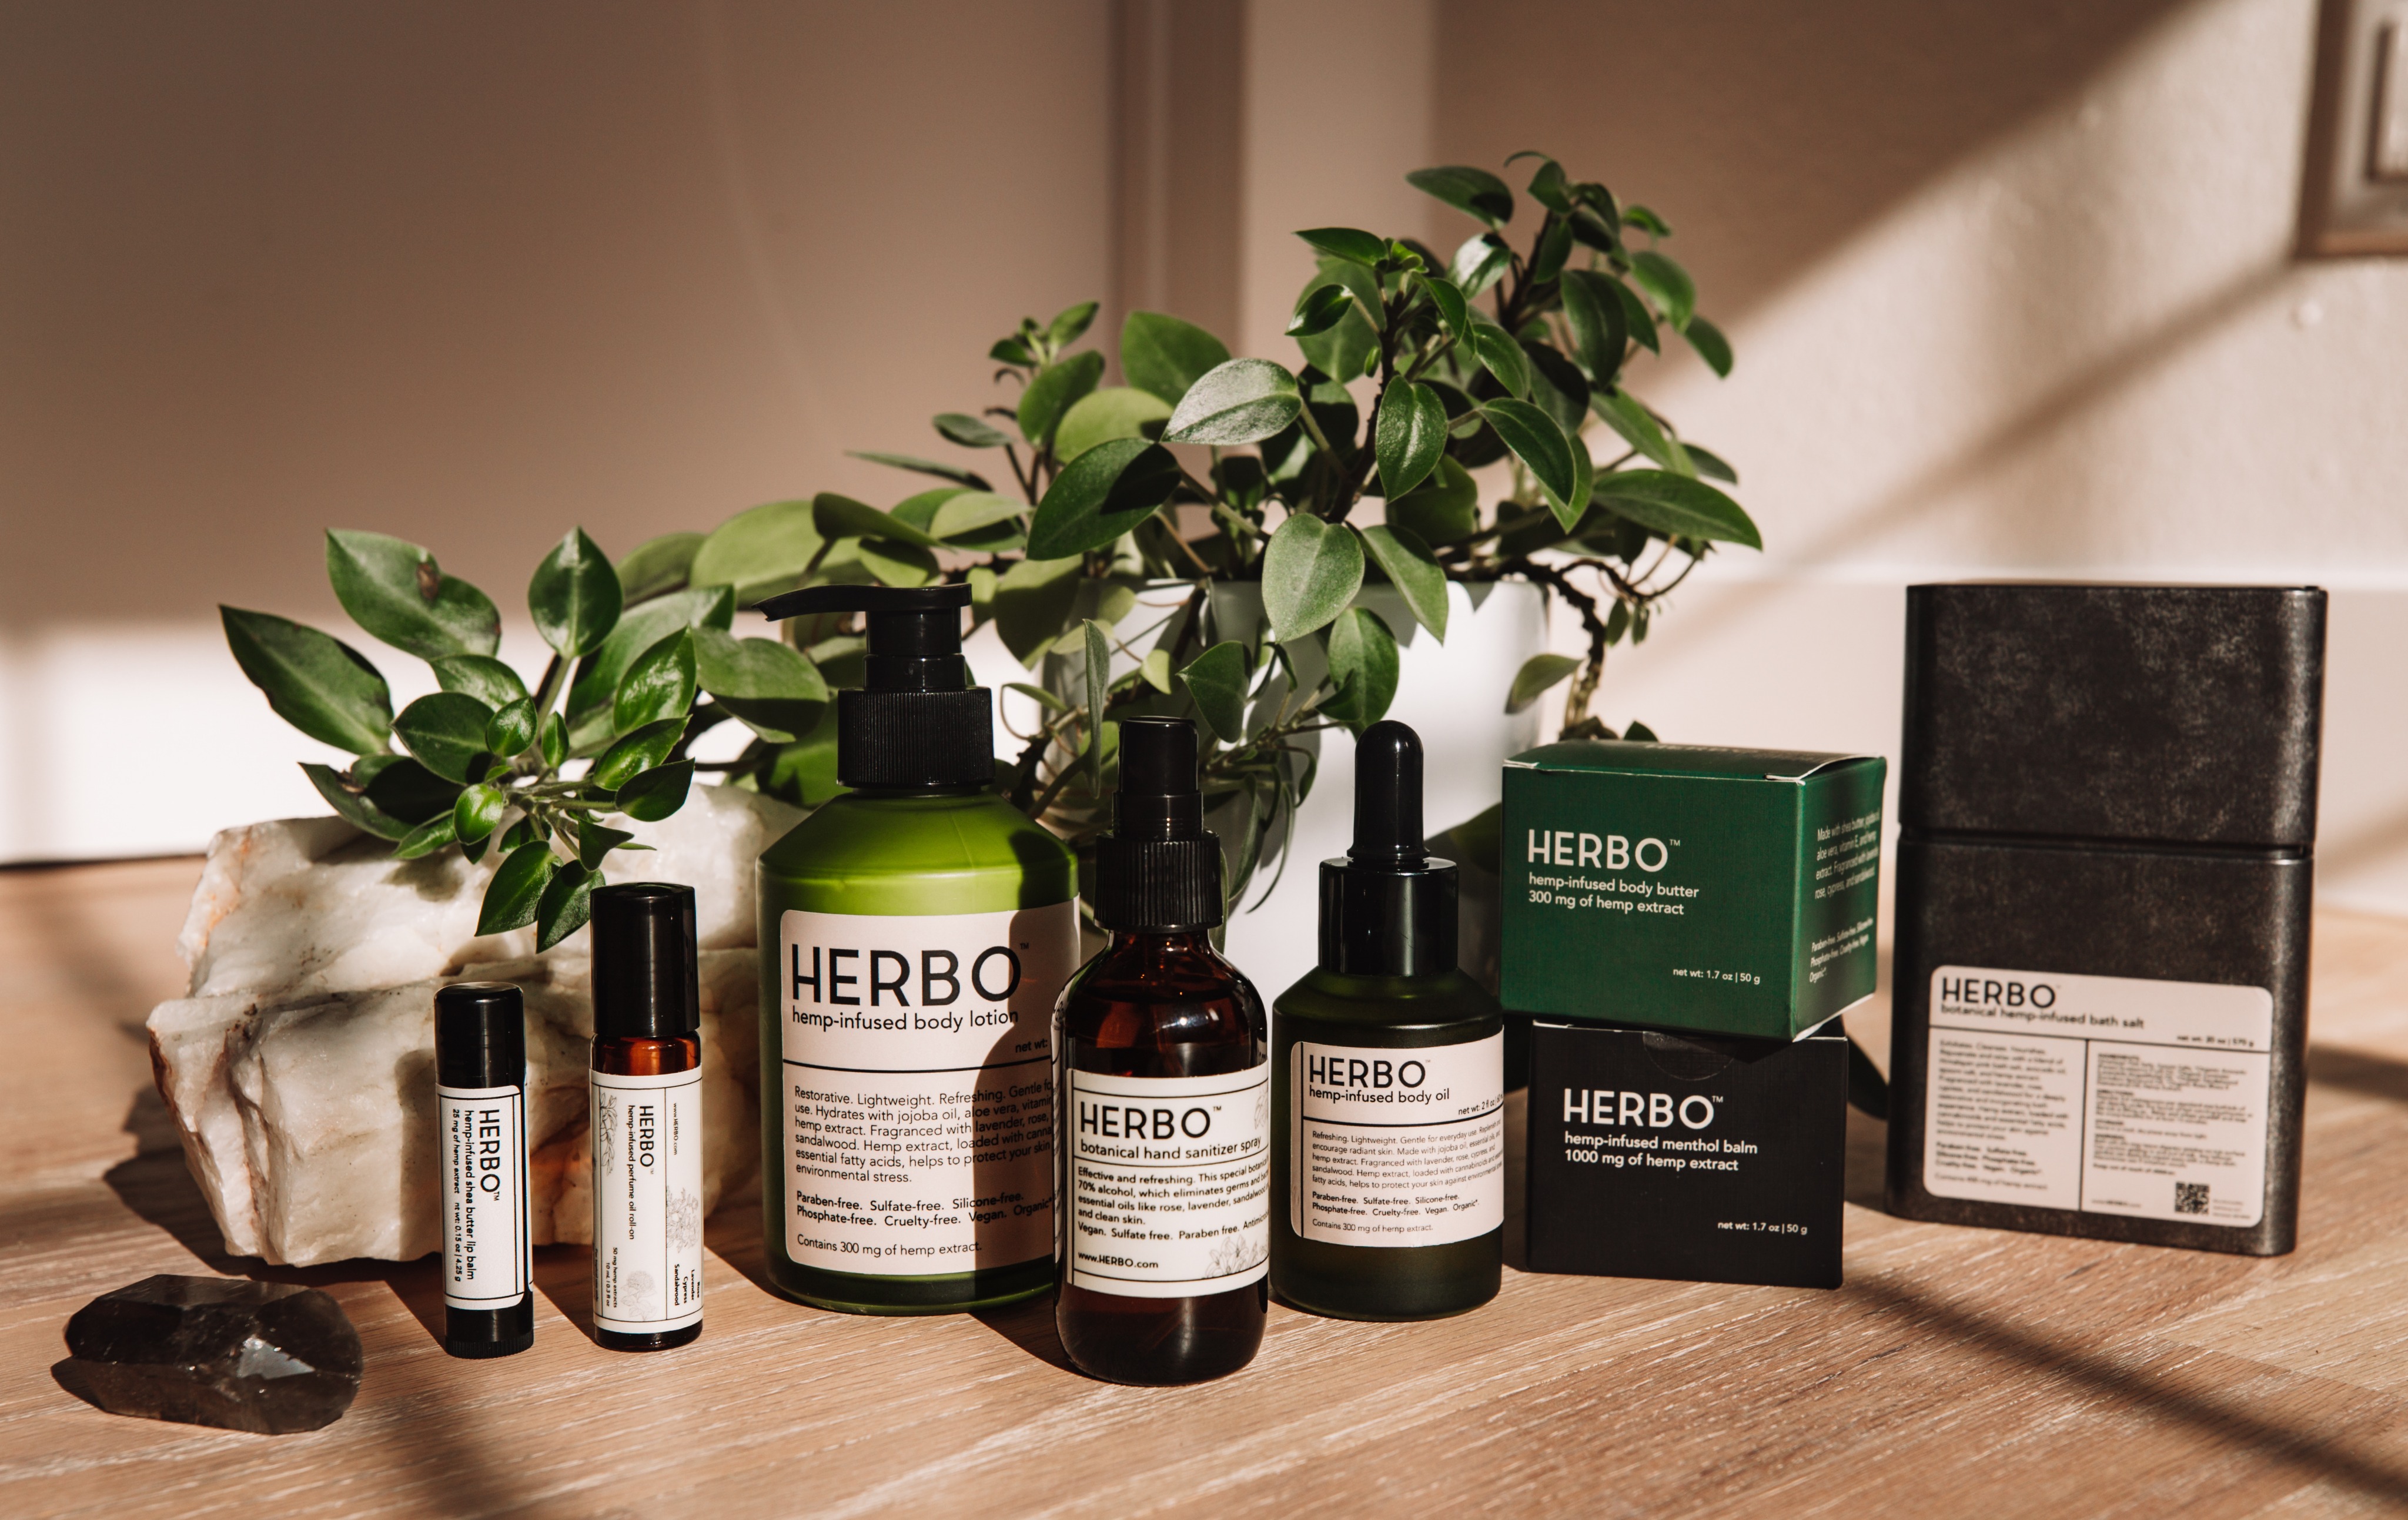 Herbo - A line-up of natural + gender-neutral skin care products made using hemp oil. 191